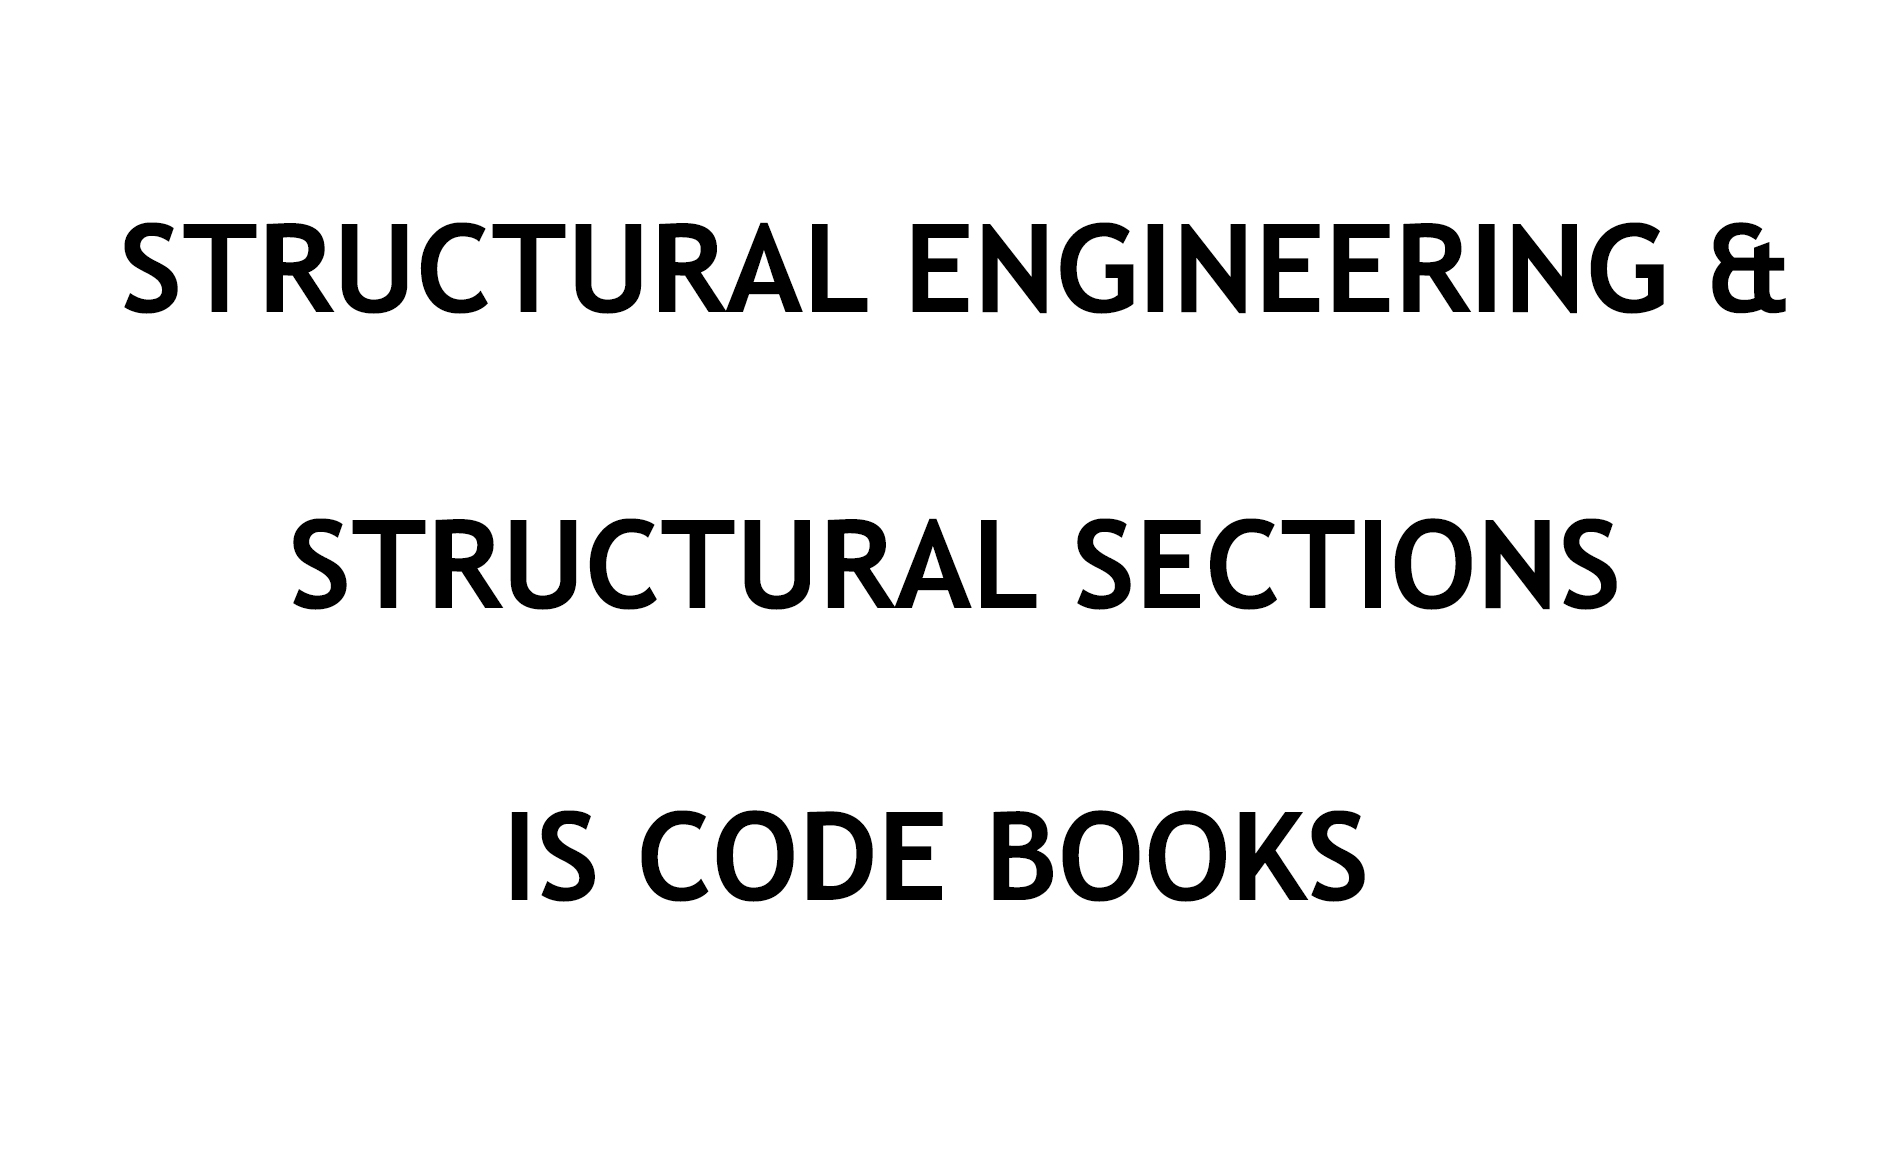 STRUCTURAL ENGINEERING AND STRUCTURAL SECTIONS INDIAN STANDARD CODE BOOKS FREE DOWNLOAD PDF CIVILENGGFORALL